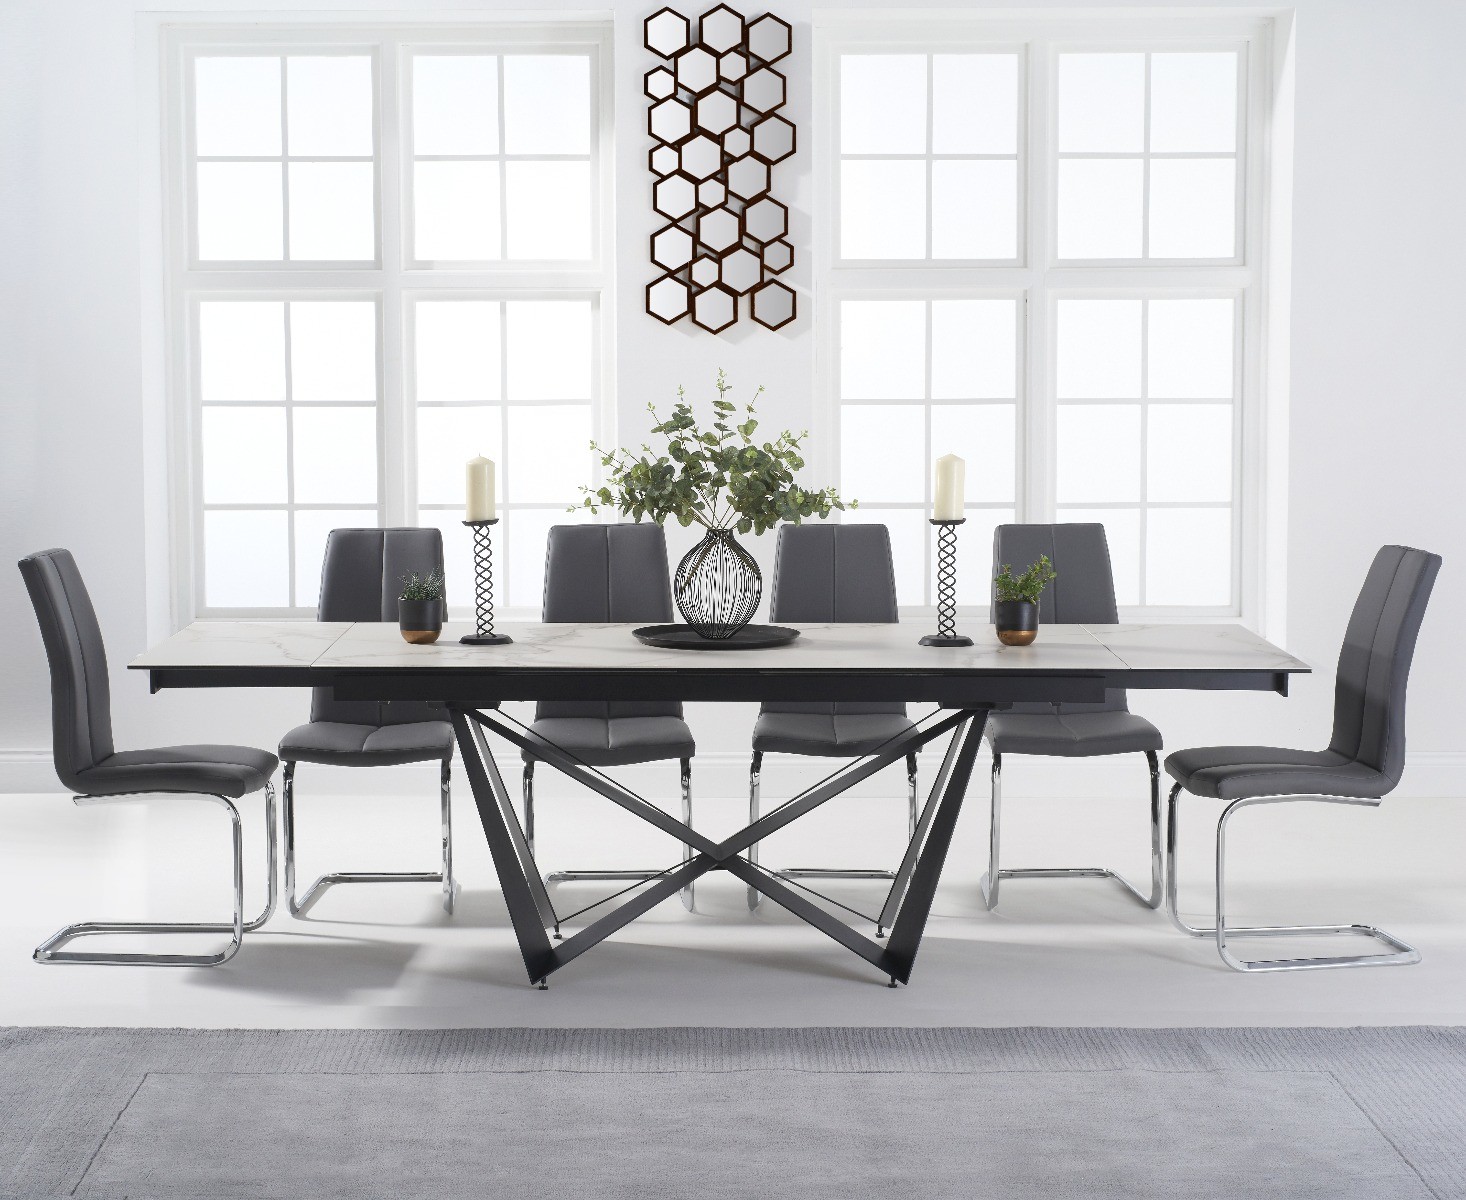 Blenheim 180cm White Ceramic Dining Table With 8 Grey Tarin Chairs